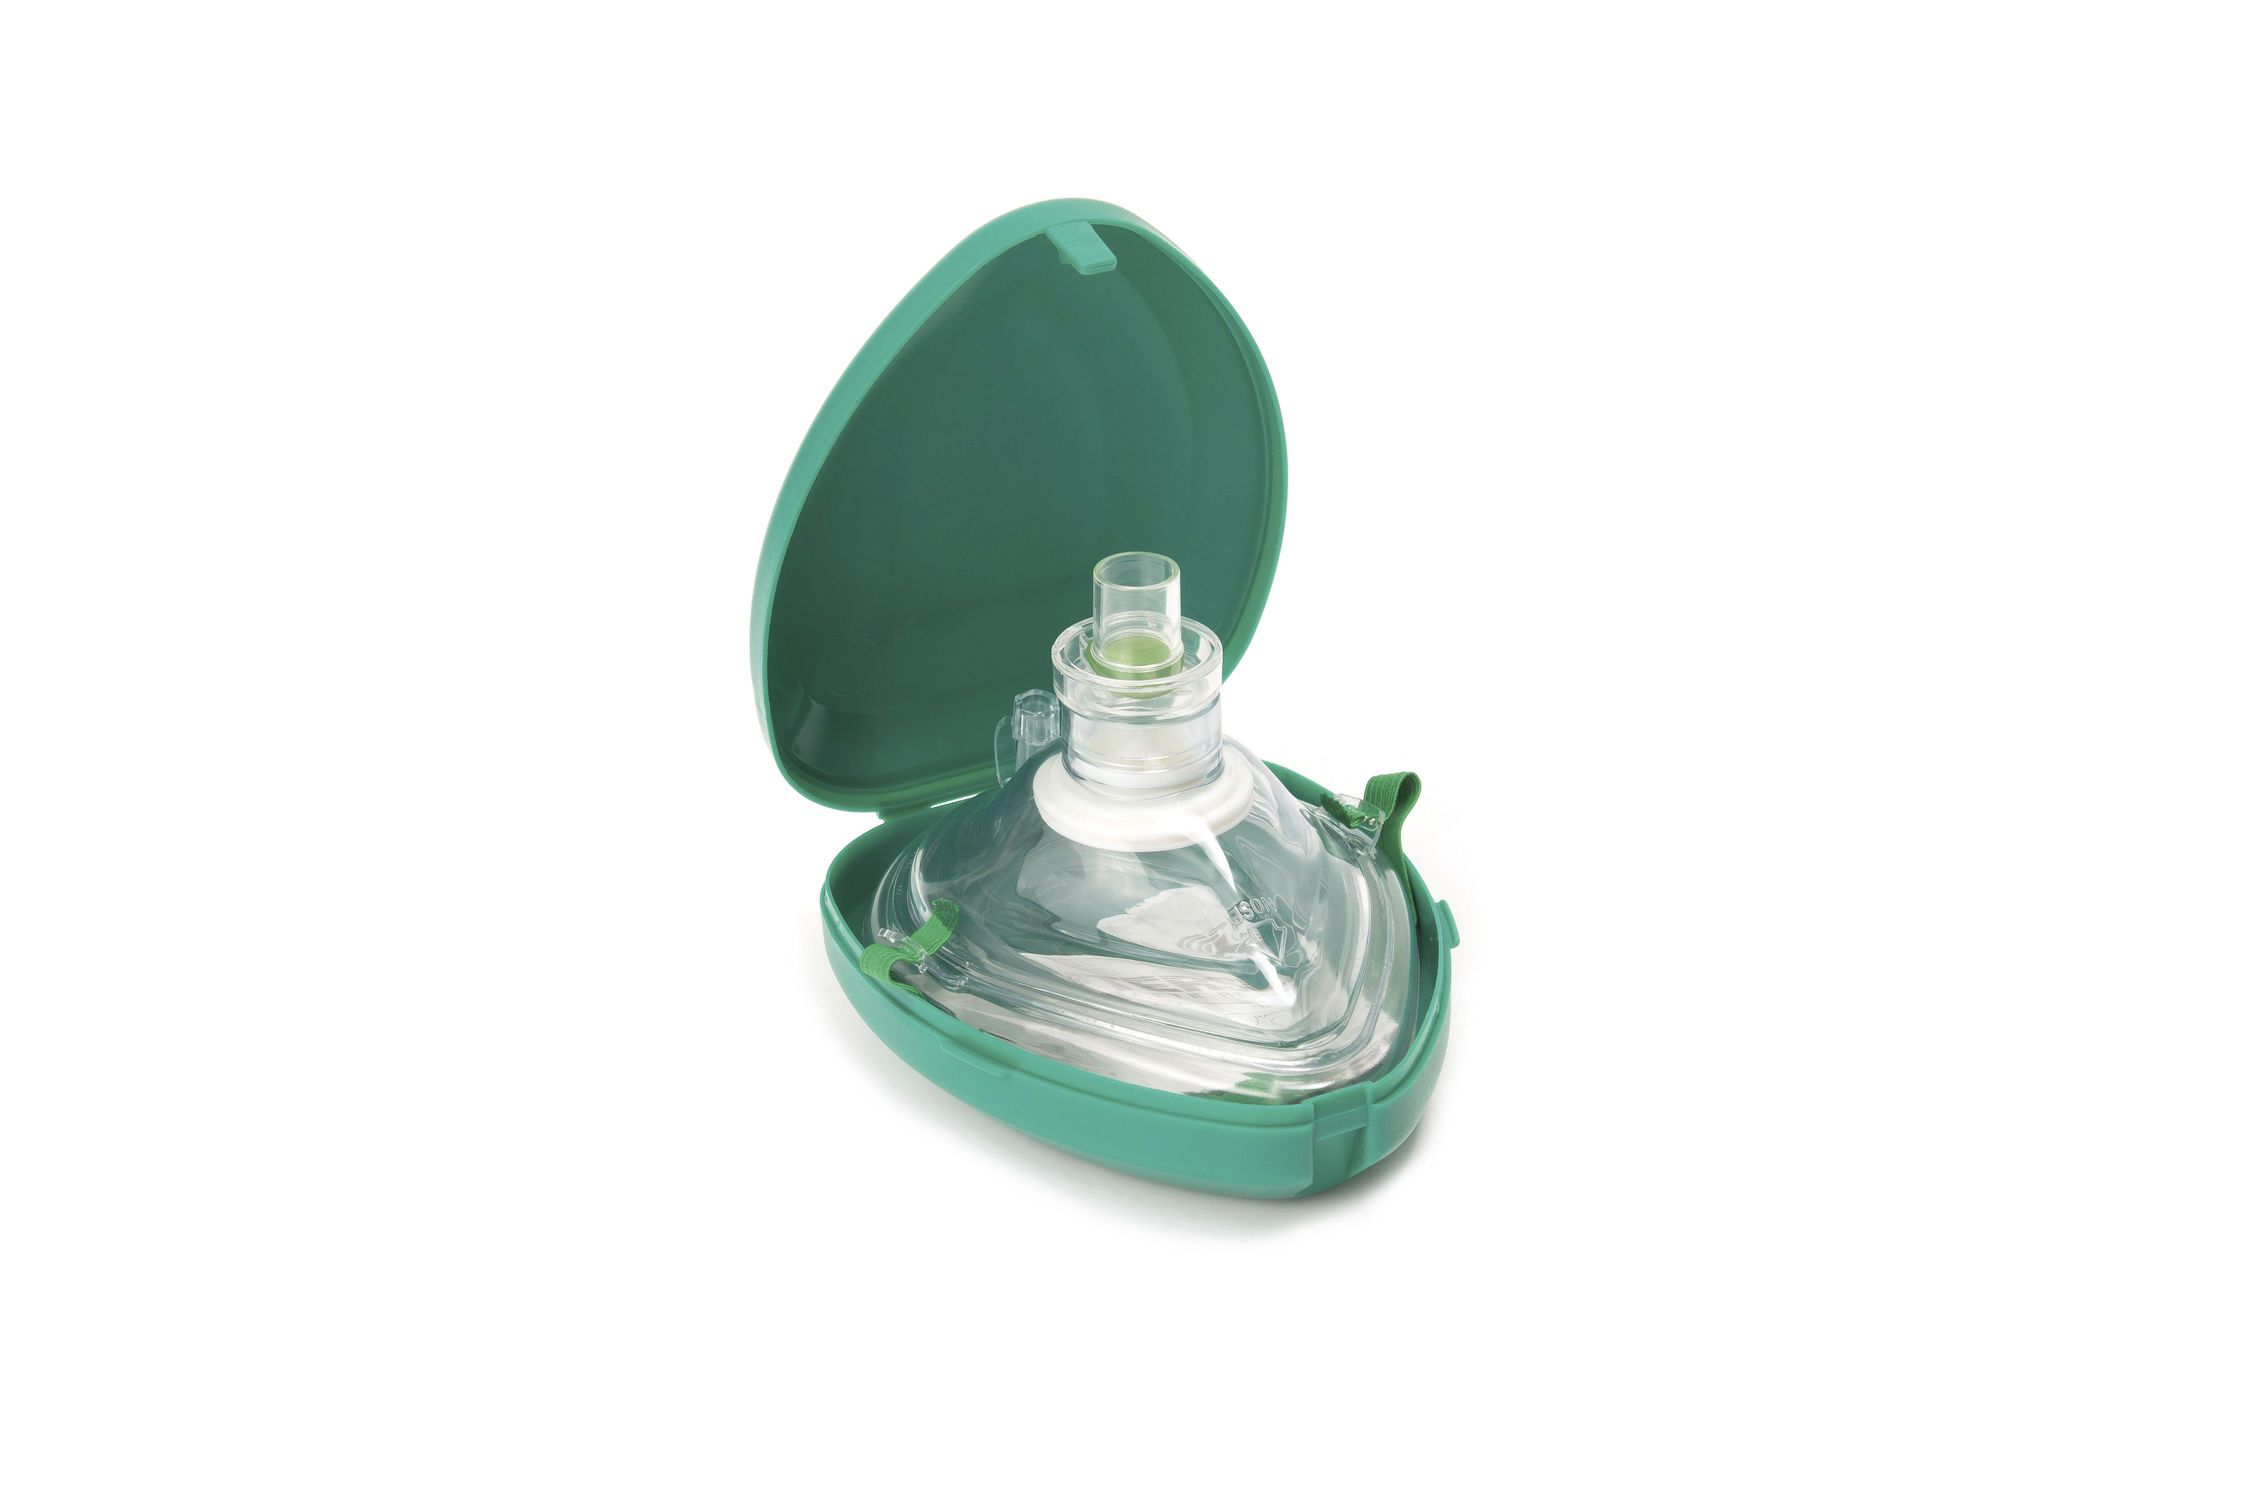 Mouth-to-mouth mask / resuscitation / facial 1158 Intersurgical